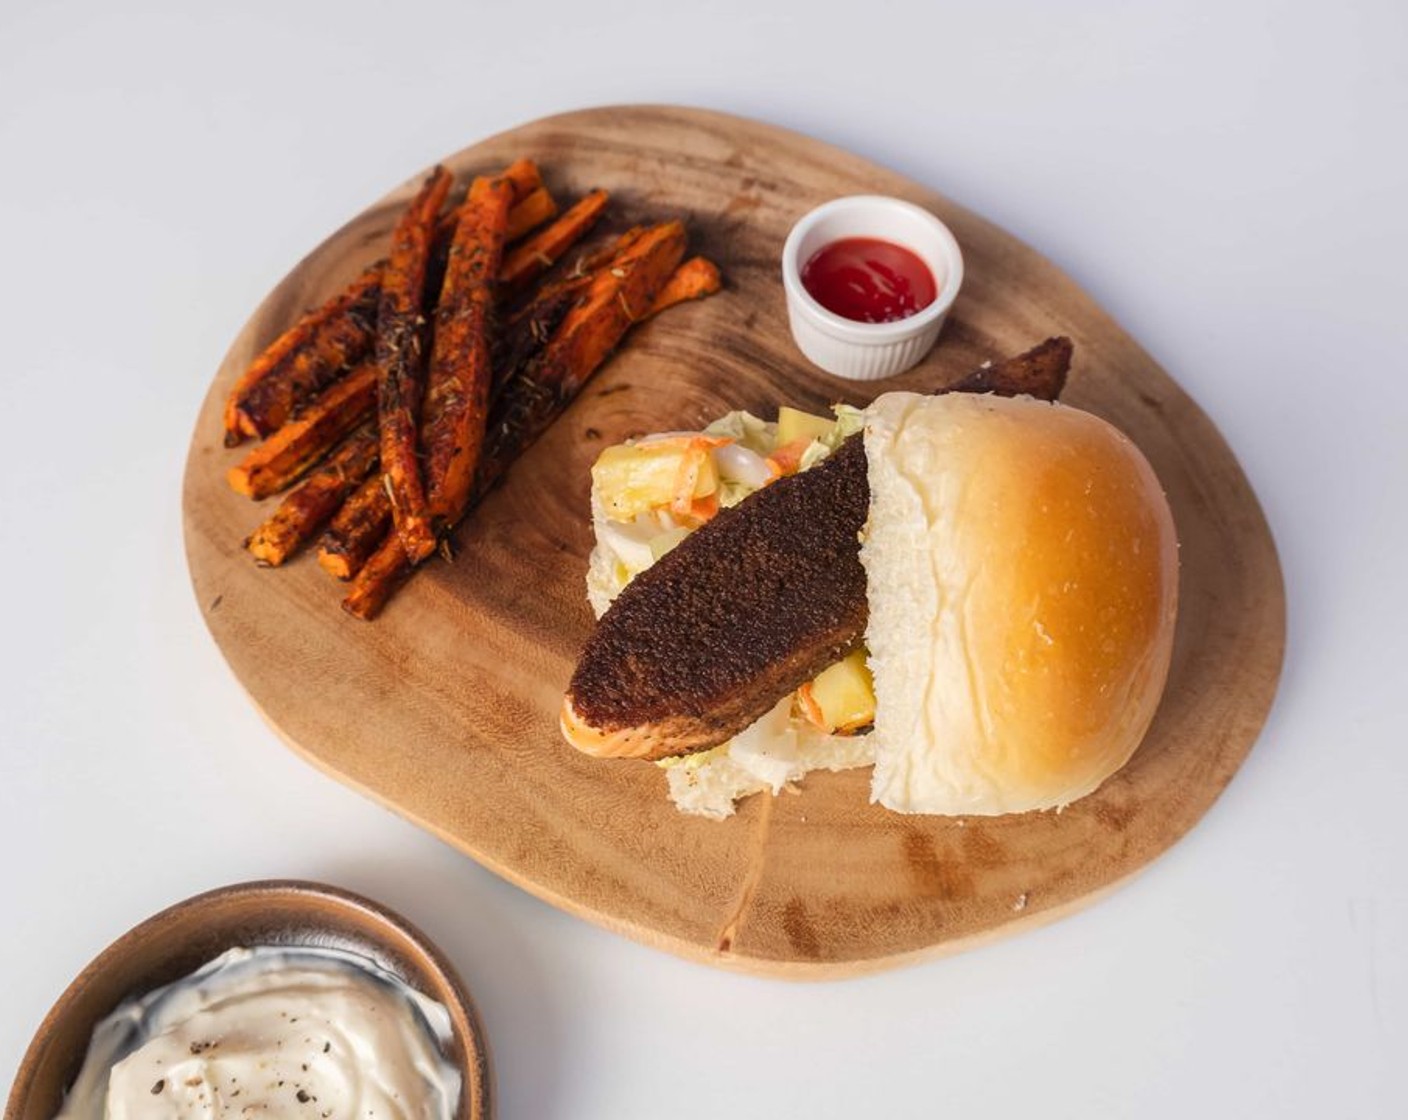 Jerk Salmon Sandwich with Charred Pineapple Slaw and Carrot Fries